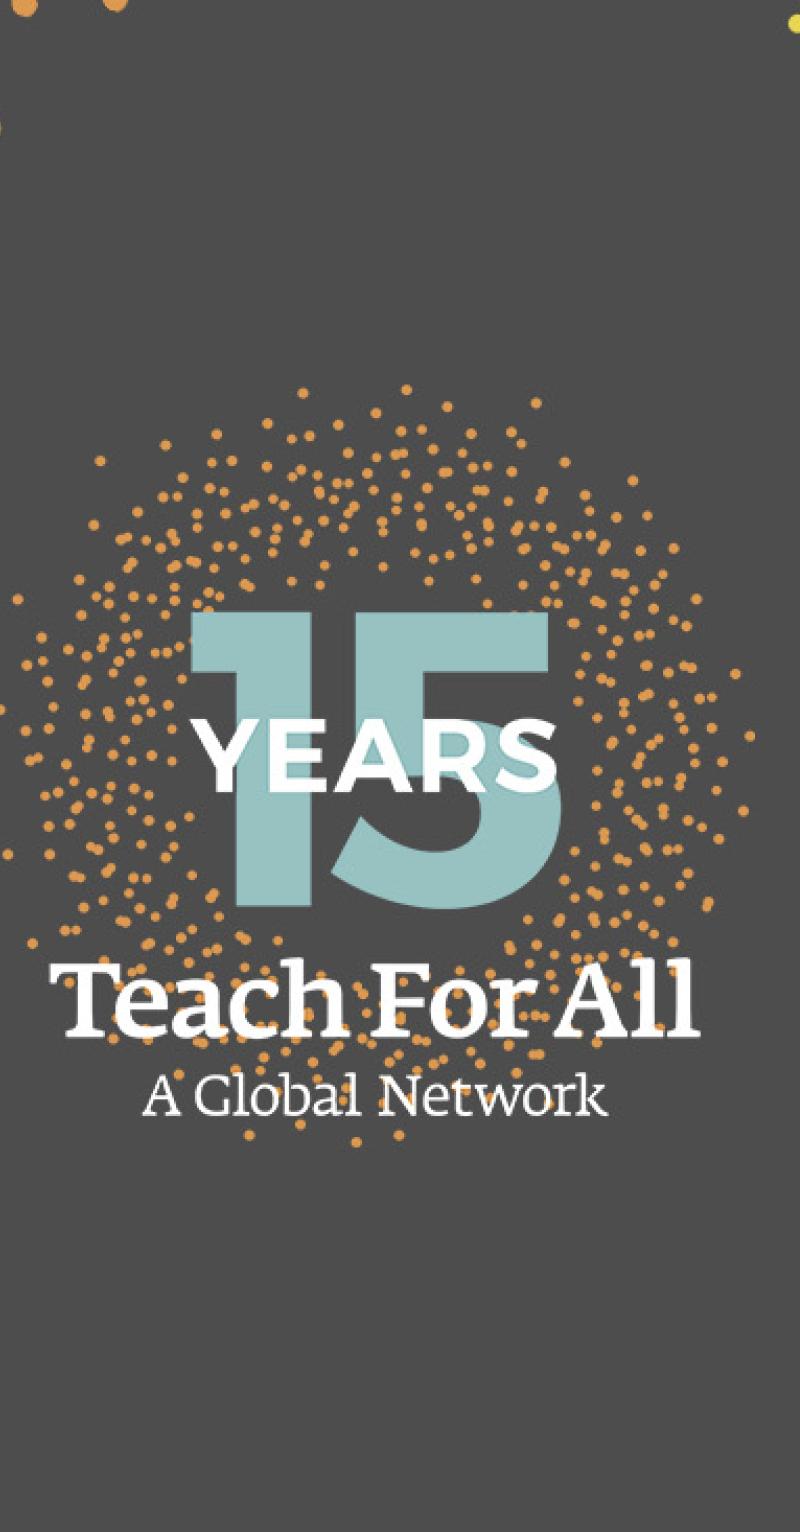 yellow and orange sparks againt a gray background, with "15 YEARS, Teach For All, A Global Network" logo